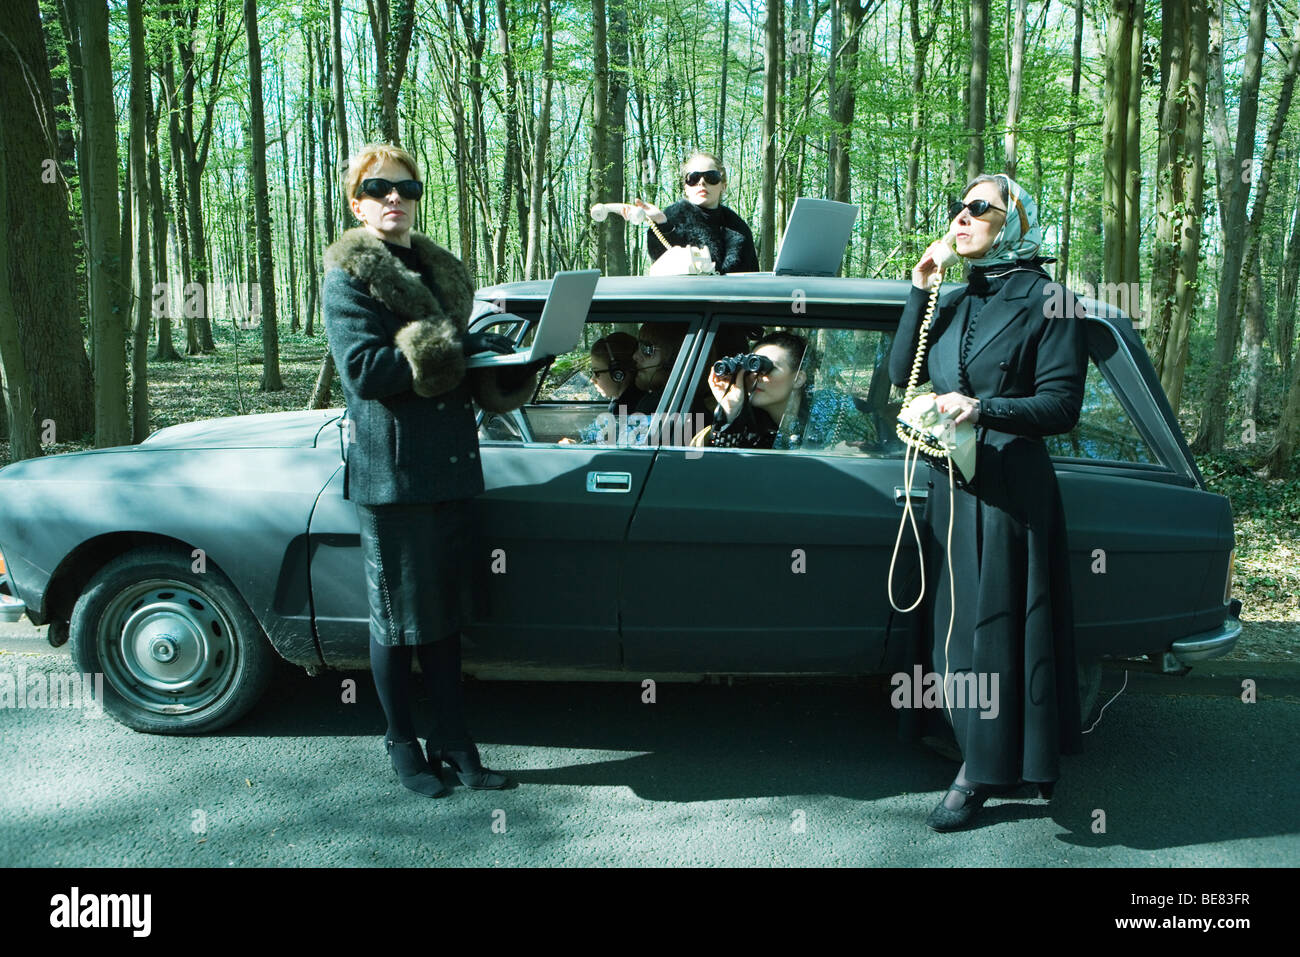 Group of spies with car parked in wooded area conducting surveillance Stock Photo